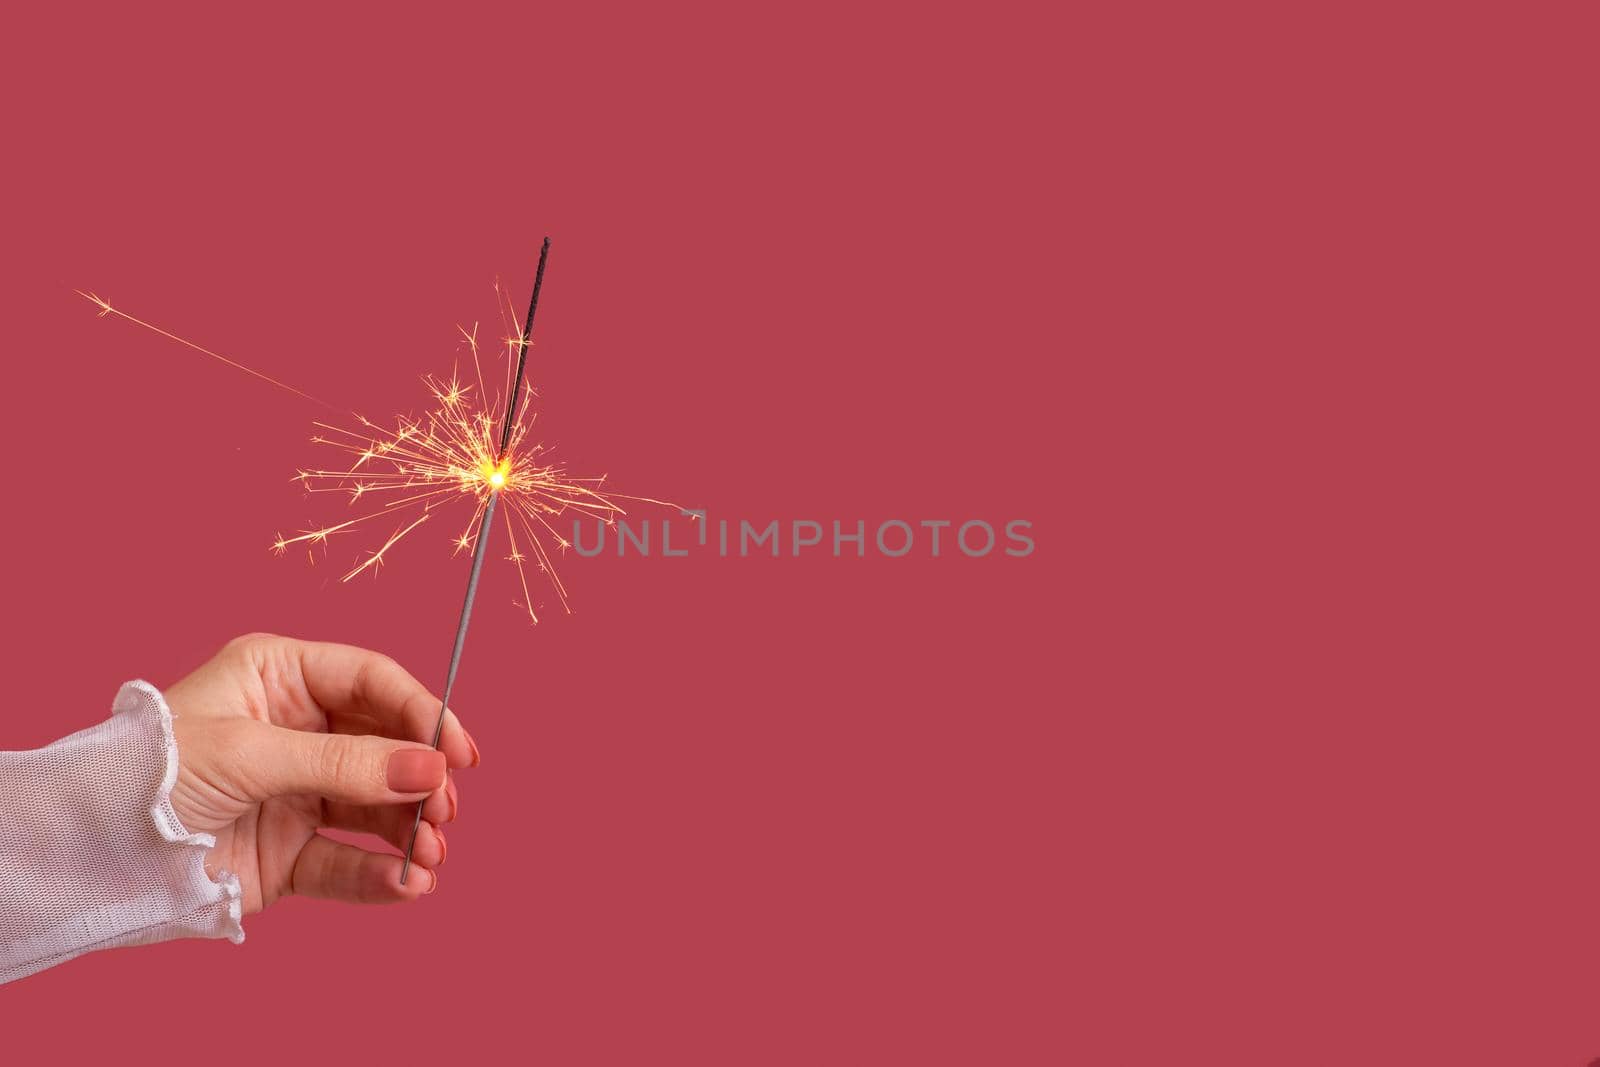 Bengal fire in female hand on a colored background. Minimalistic christmas festive concept with copy space.